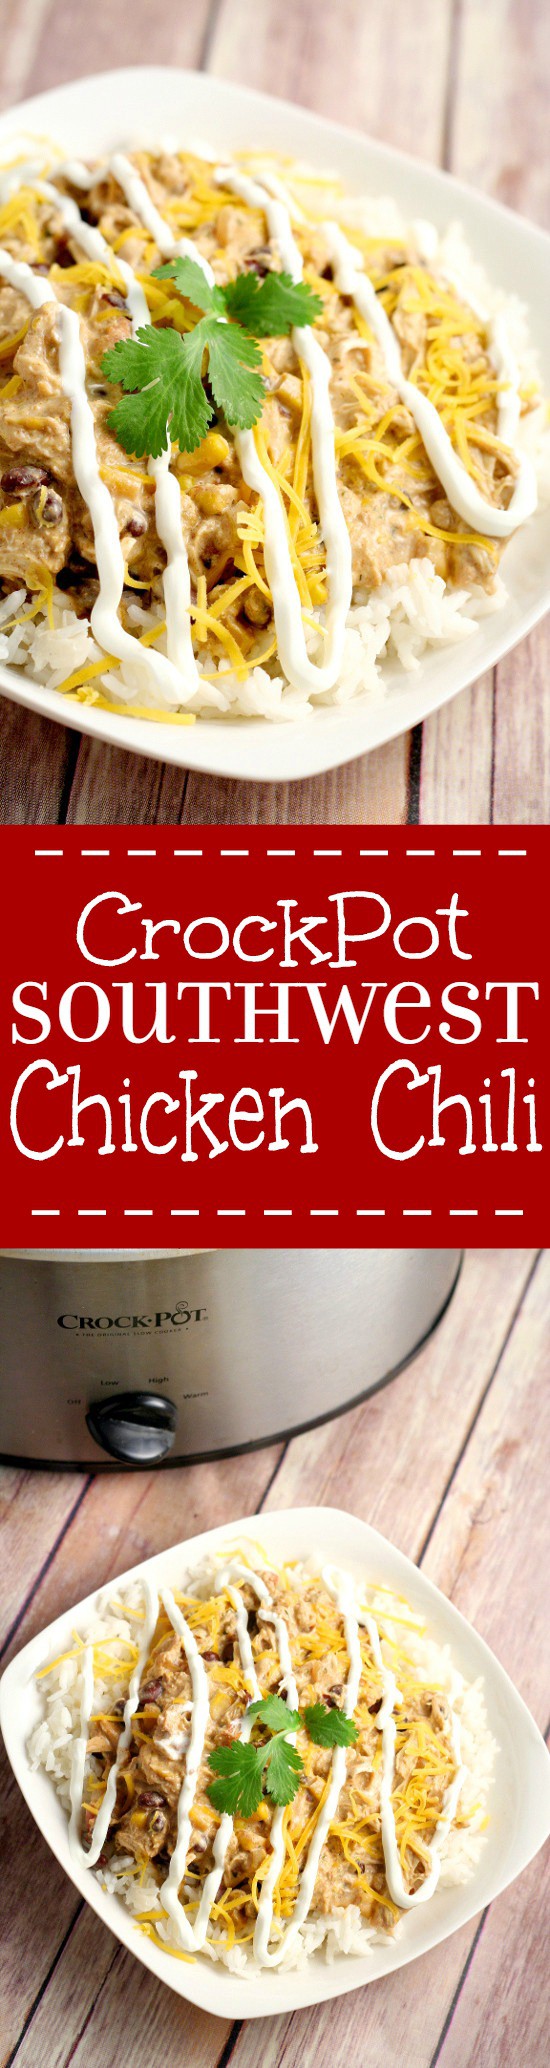 Crockpot Southwest Chicken Chili recipe is so easy you don't have to thaw the chicken! With cream cheese and classic Southwest flavors like corn and beans. Serve with warm, buttered cornbread. Such an easy family dinner recipe idea in the slow cooker!  